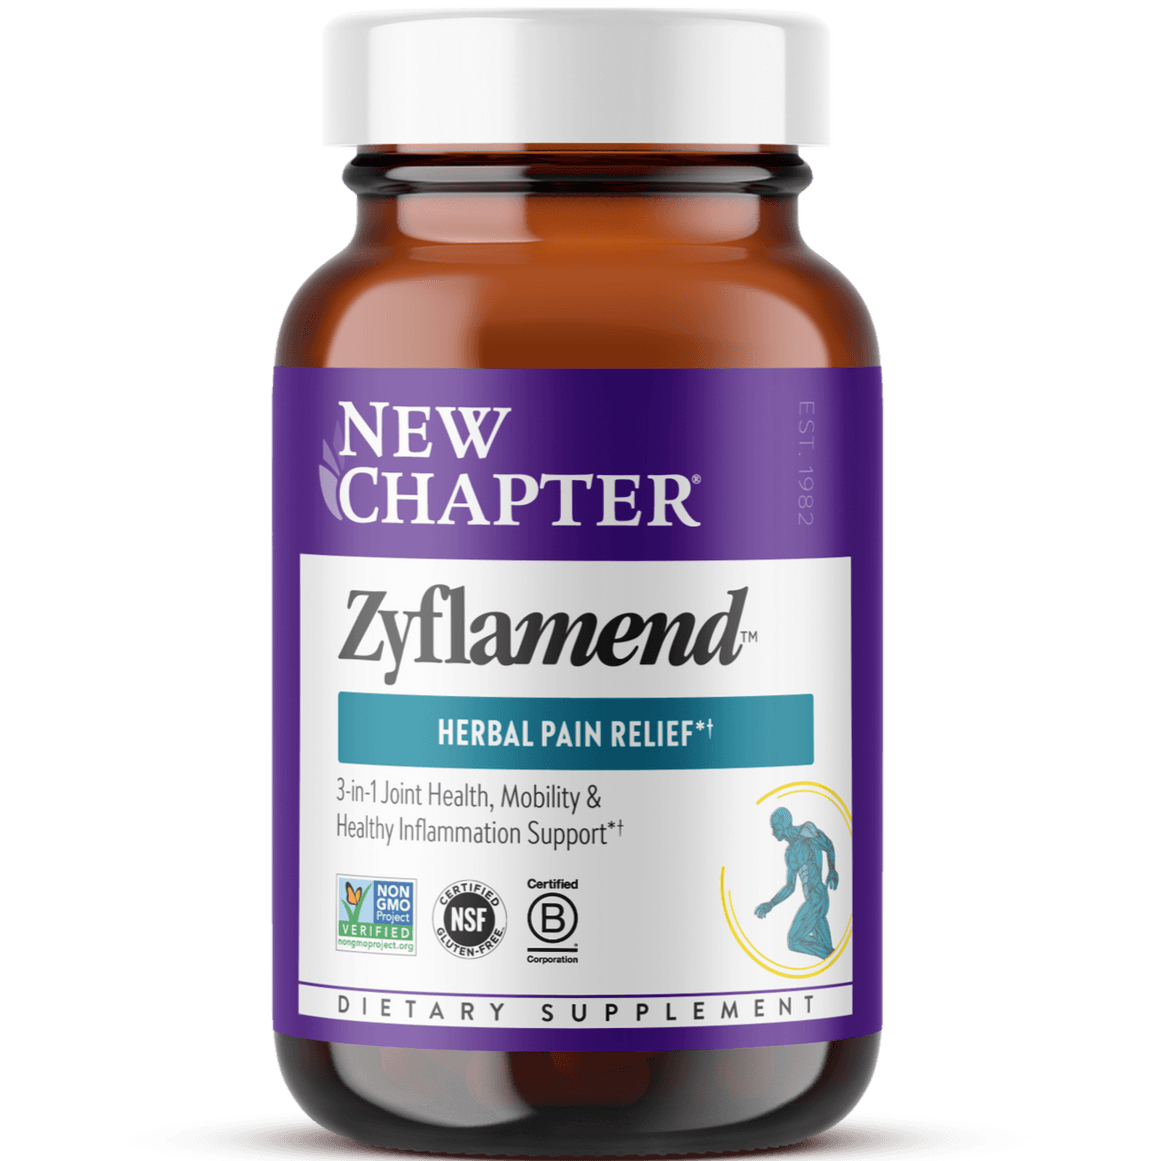 New Chapter Zyflamend 60 Vegetarian Capsules Supplements - Pain & Inflammation at Village Vitamin Store